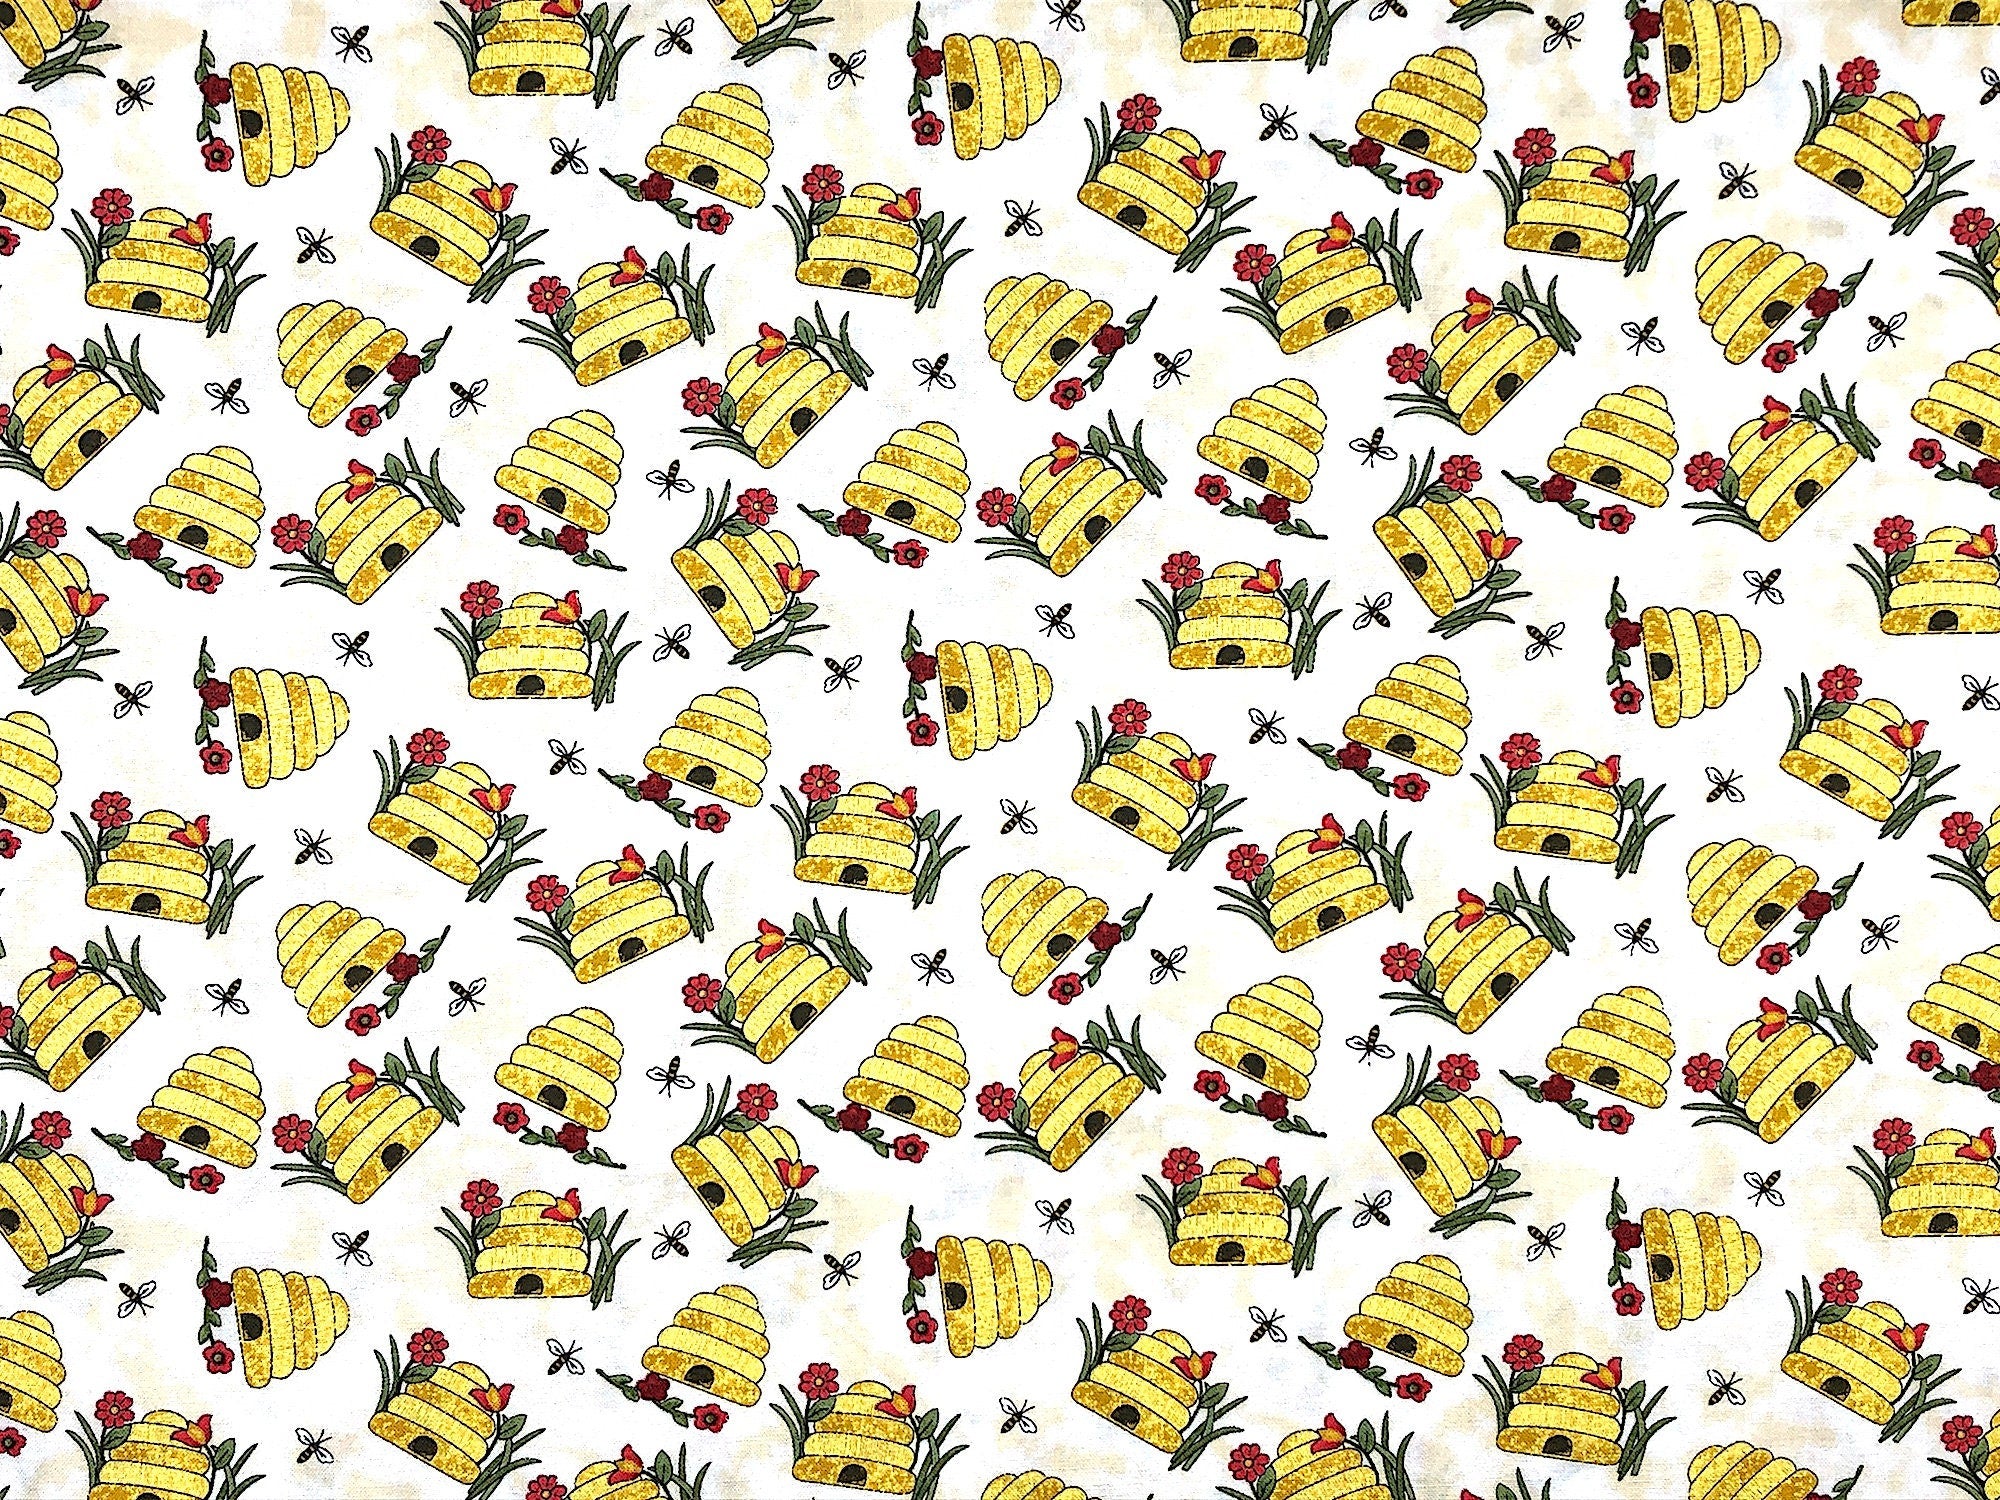 This fabric is called Bee Skep with Bees Vanilla and is covered with bee hives, bees and flowers. This fabric is part of the Colorful Cats collection.